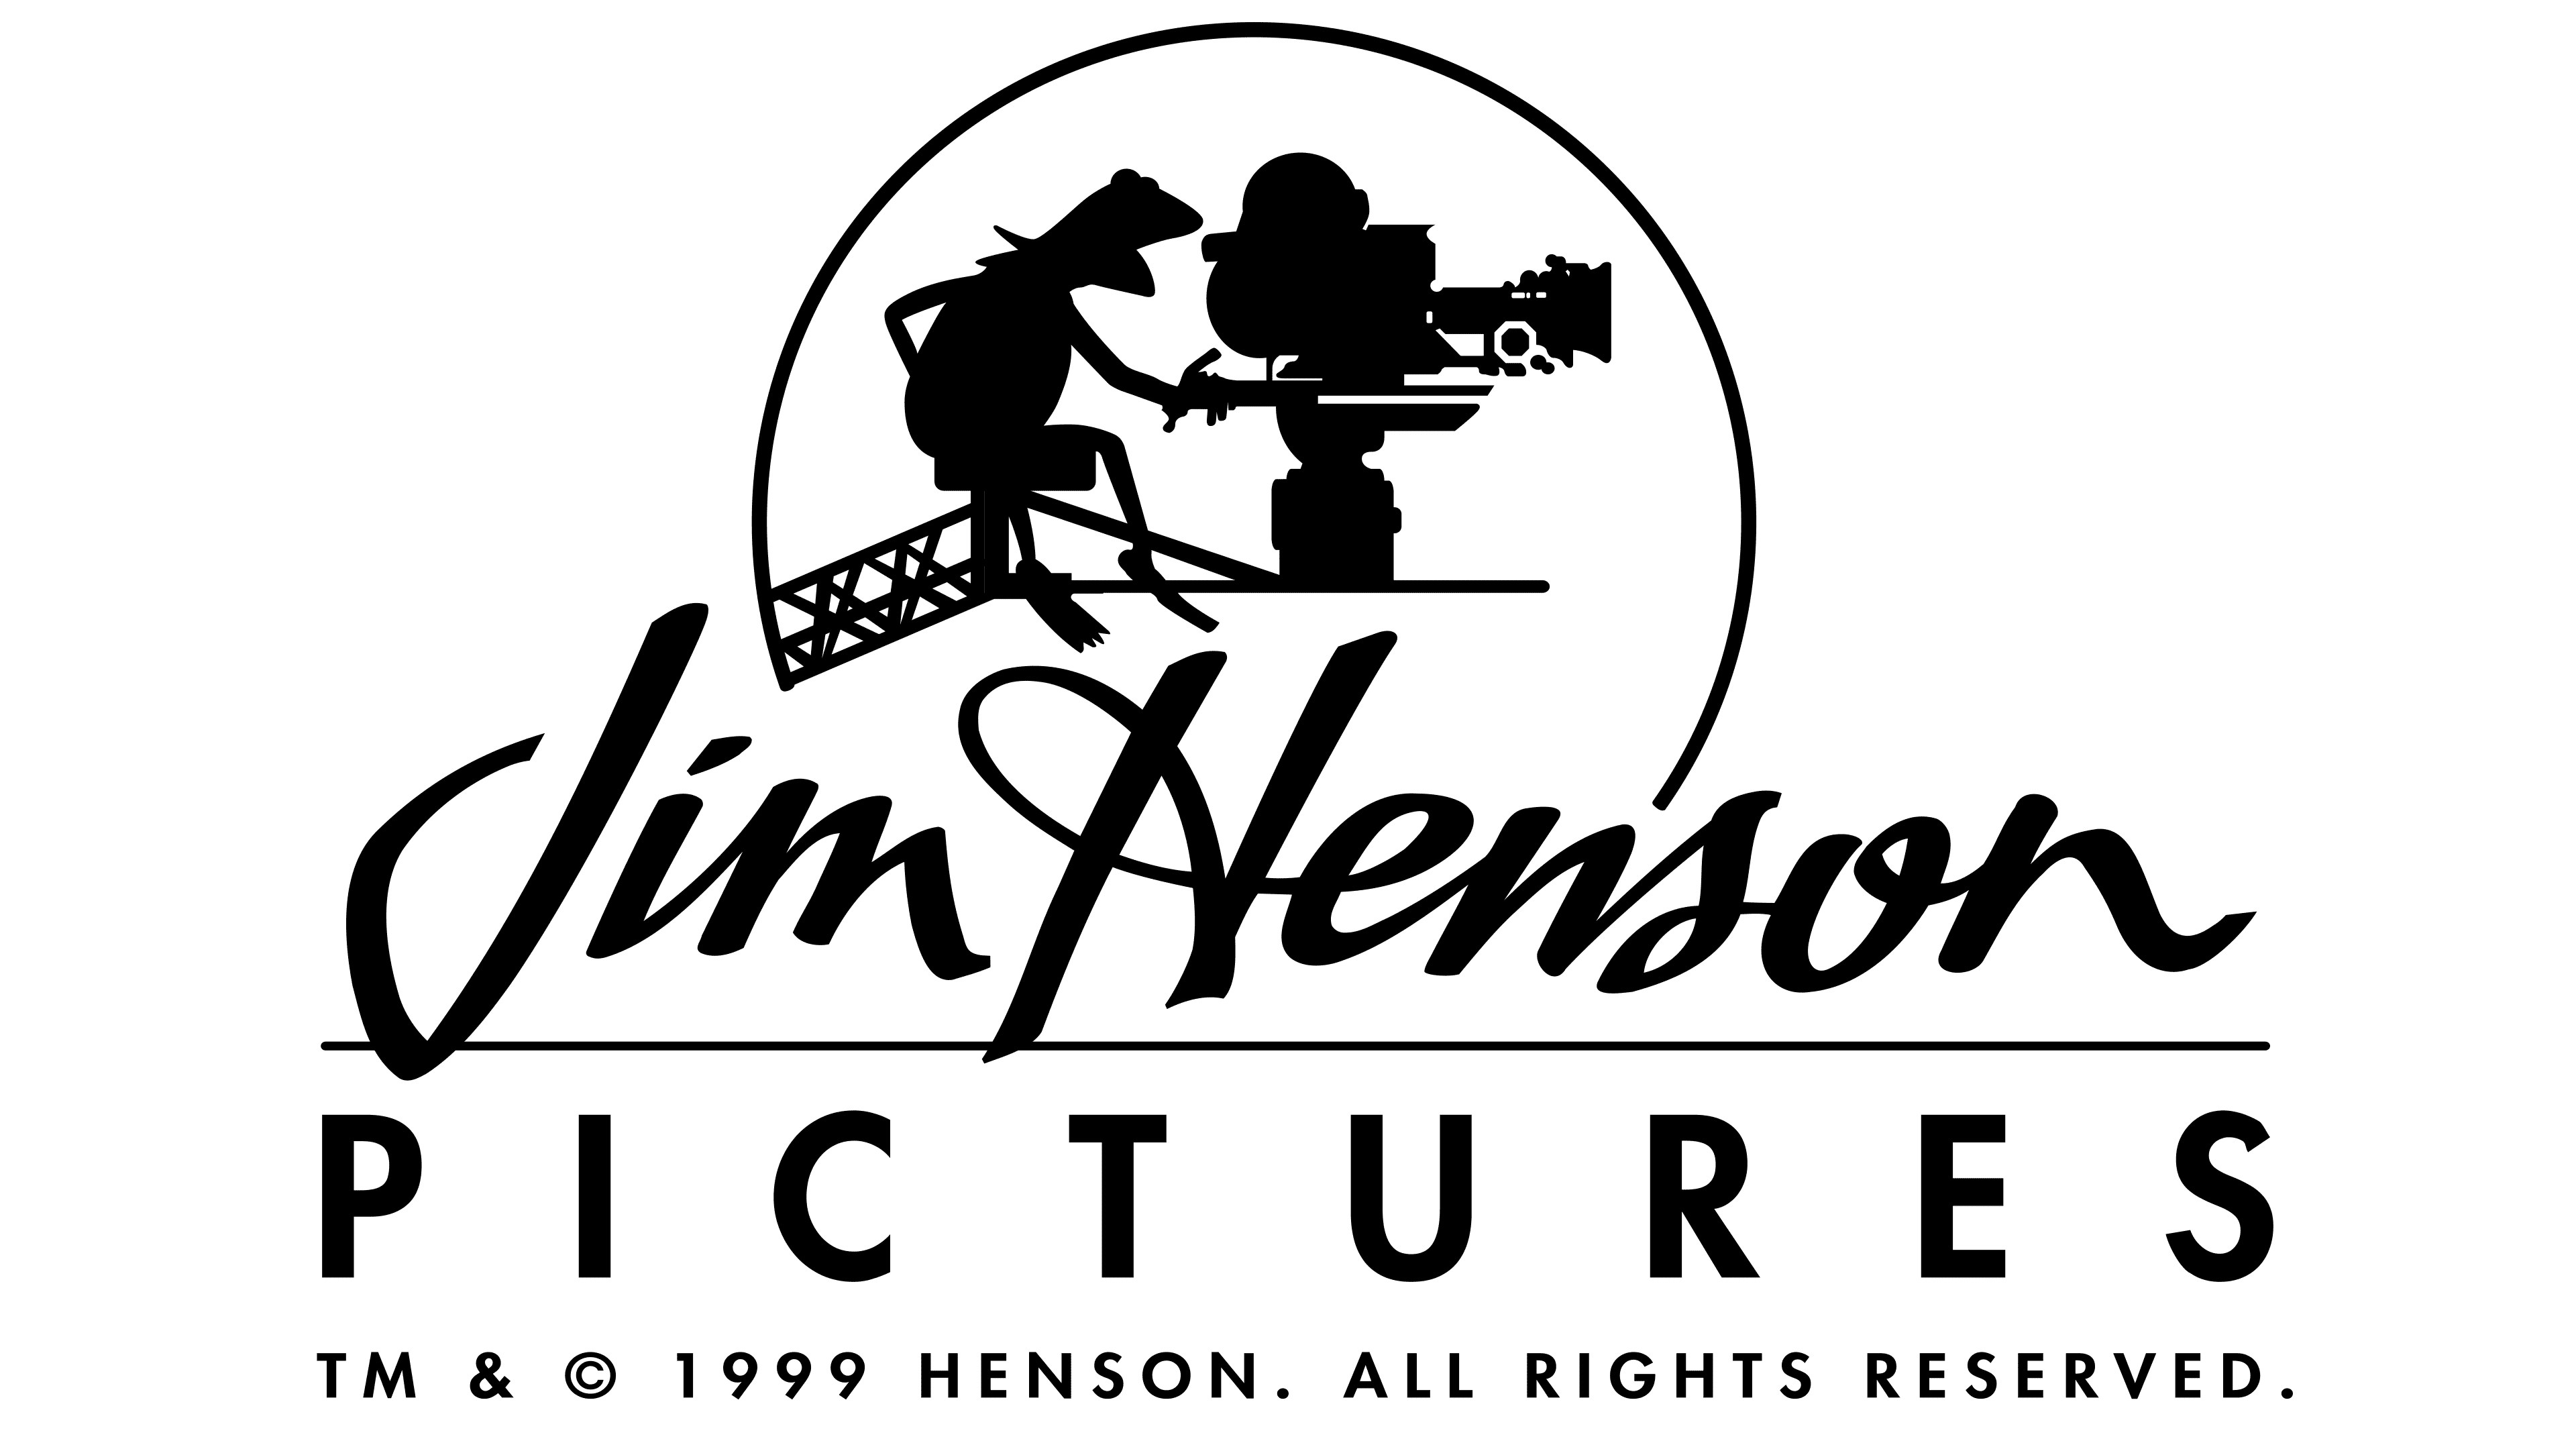 Jim Henson Pictures Logo, symbol, meaning, history, PNG, brand